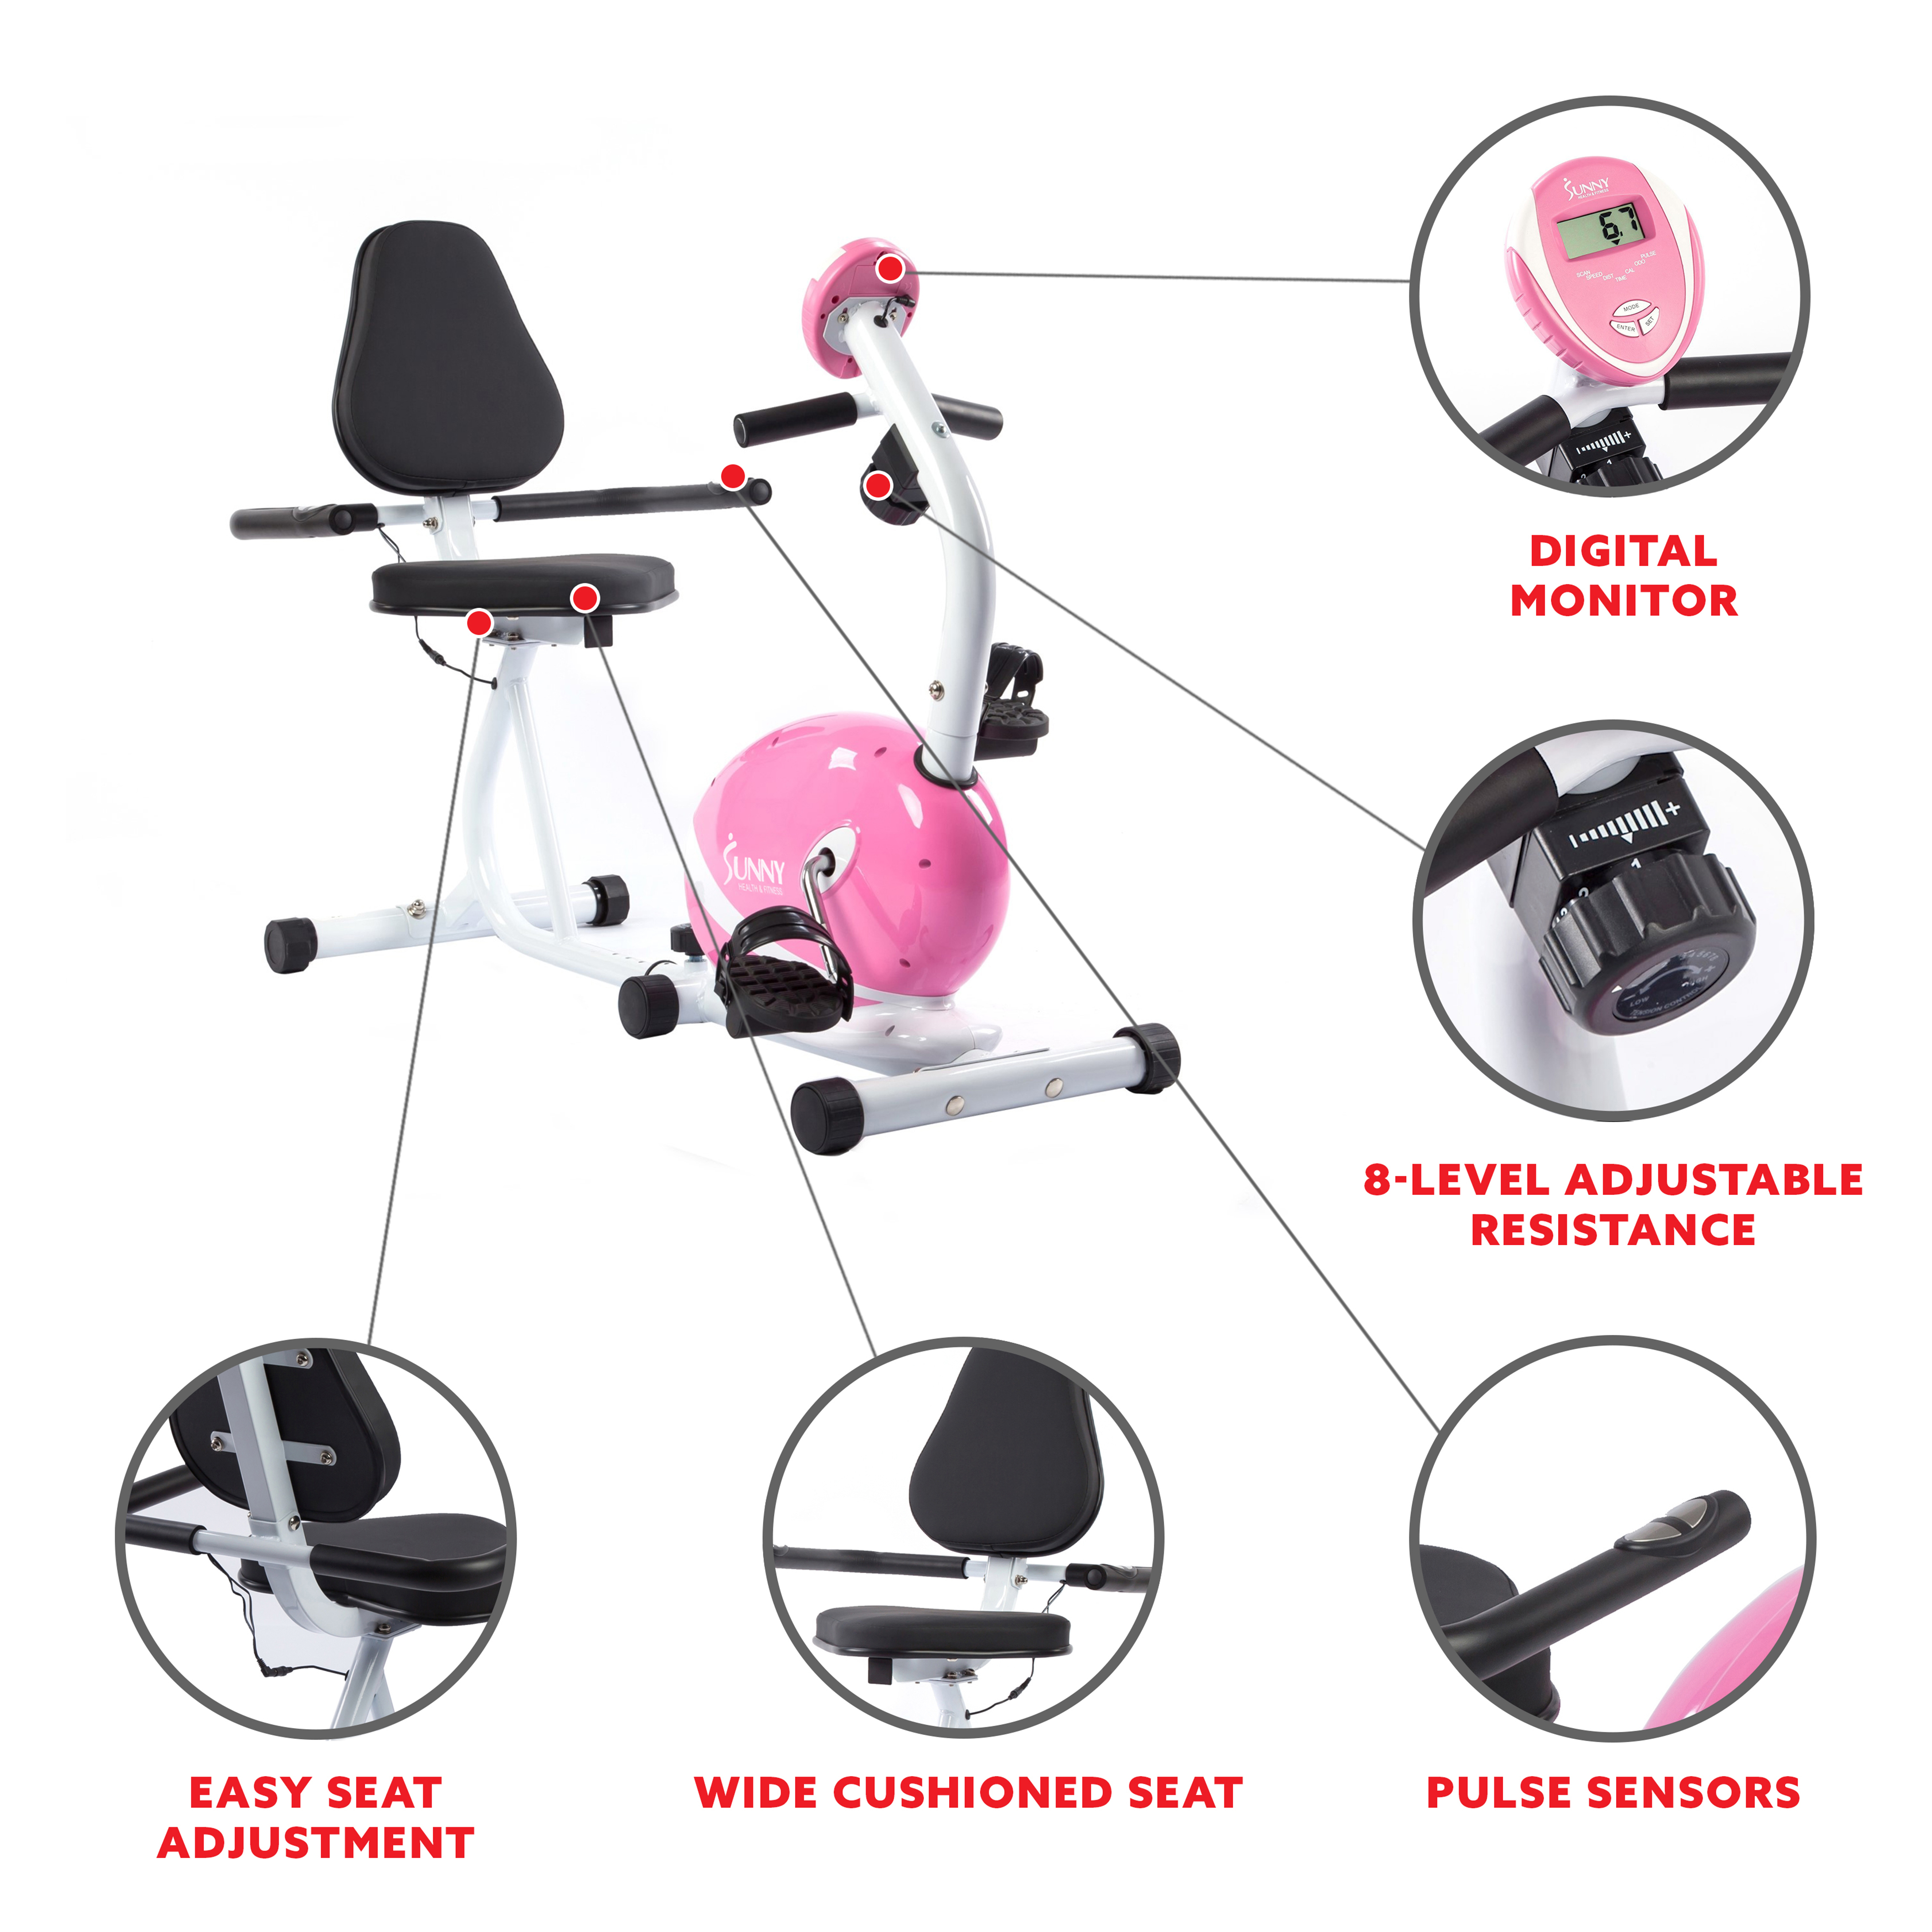 Sunny Health & Fitness Magnetic Stationary Recumbent Exercise Bike, 220 lb Capacity, LCD Monitor, and Pulse Rate Sensor, P8400 - image 3 of 9